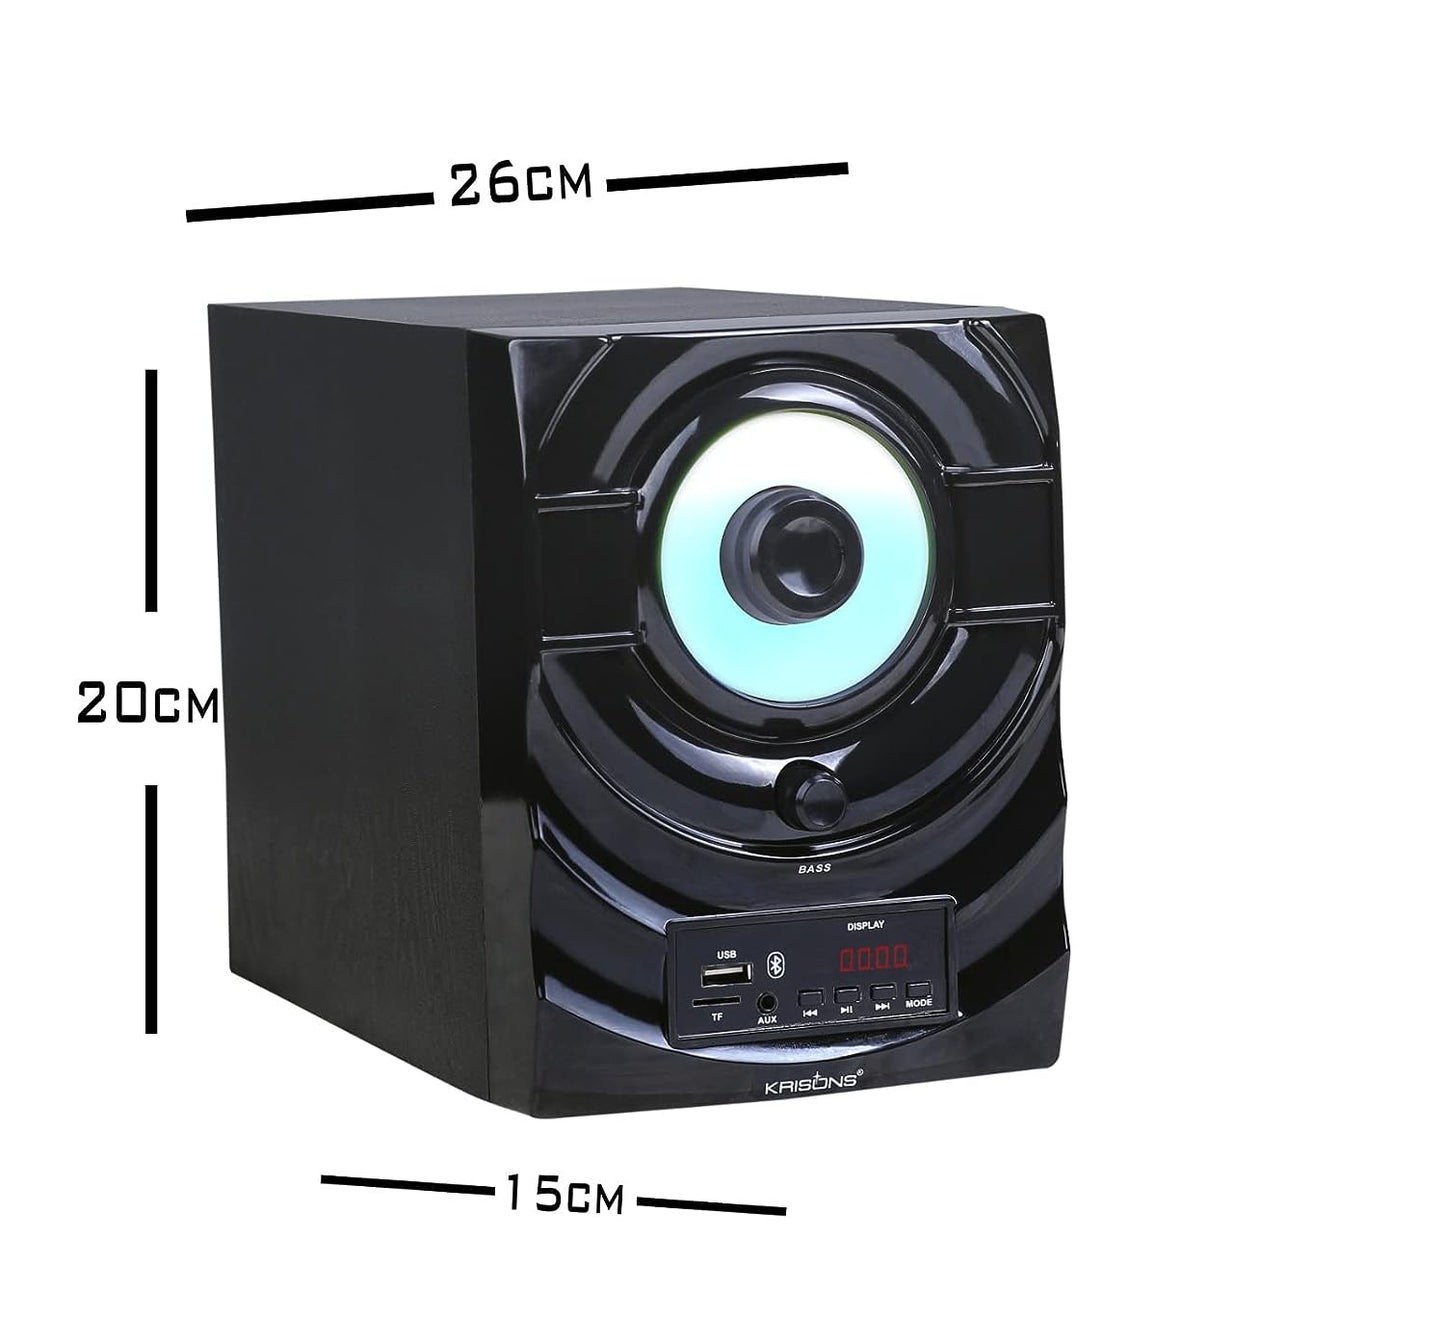 KRISONS Crown 5.1 Home Theater | Bluetooth Supporting Home Theatre 5.1 | USB, AUX, LCD Display, Built-in FM, Recording, Remote Control. 60W Home Theatre